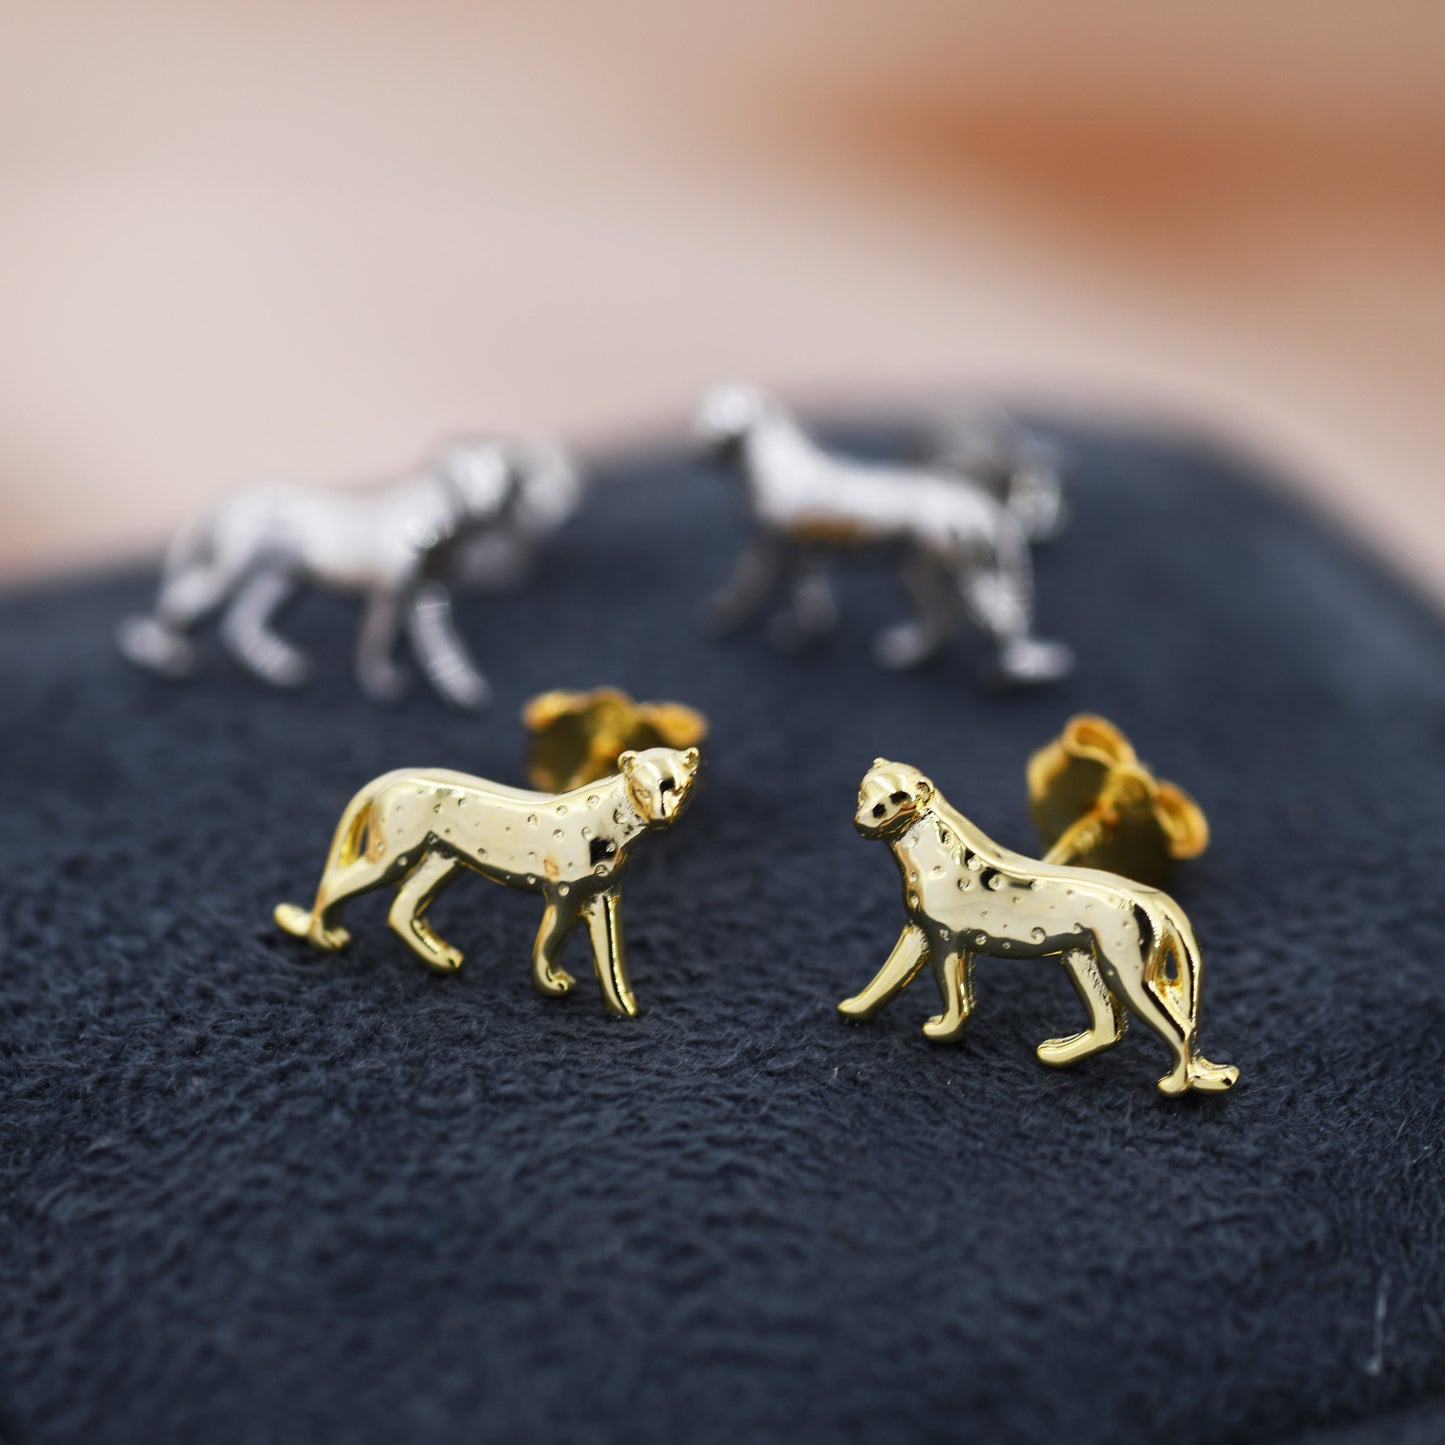 Tiny Leopard Stud Earrings in Sterling Silver, Silver or Gold, Jaguar Stacking Earrings,  Nature Inspired Animal Earrings